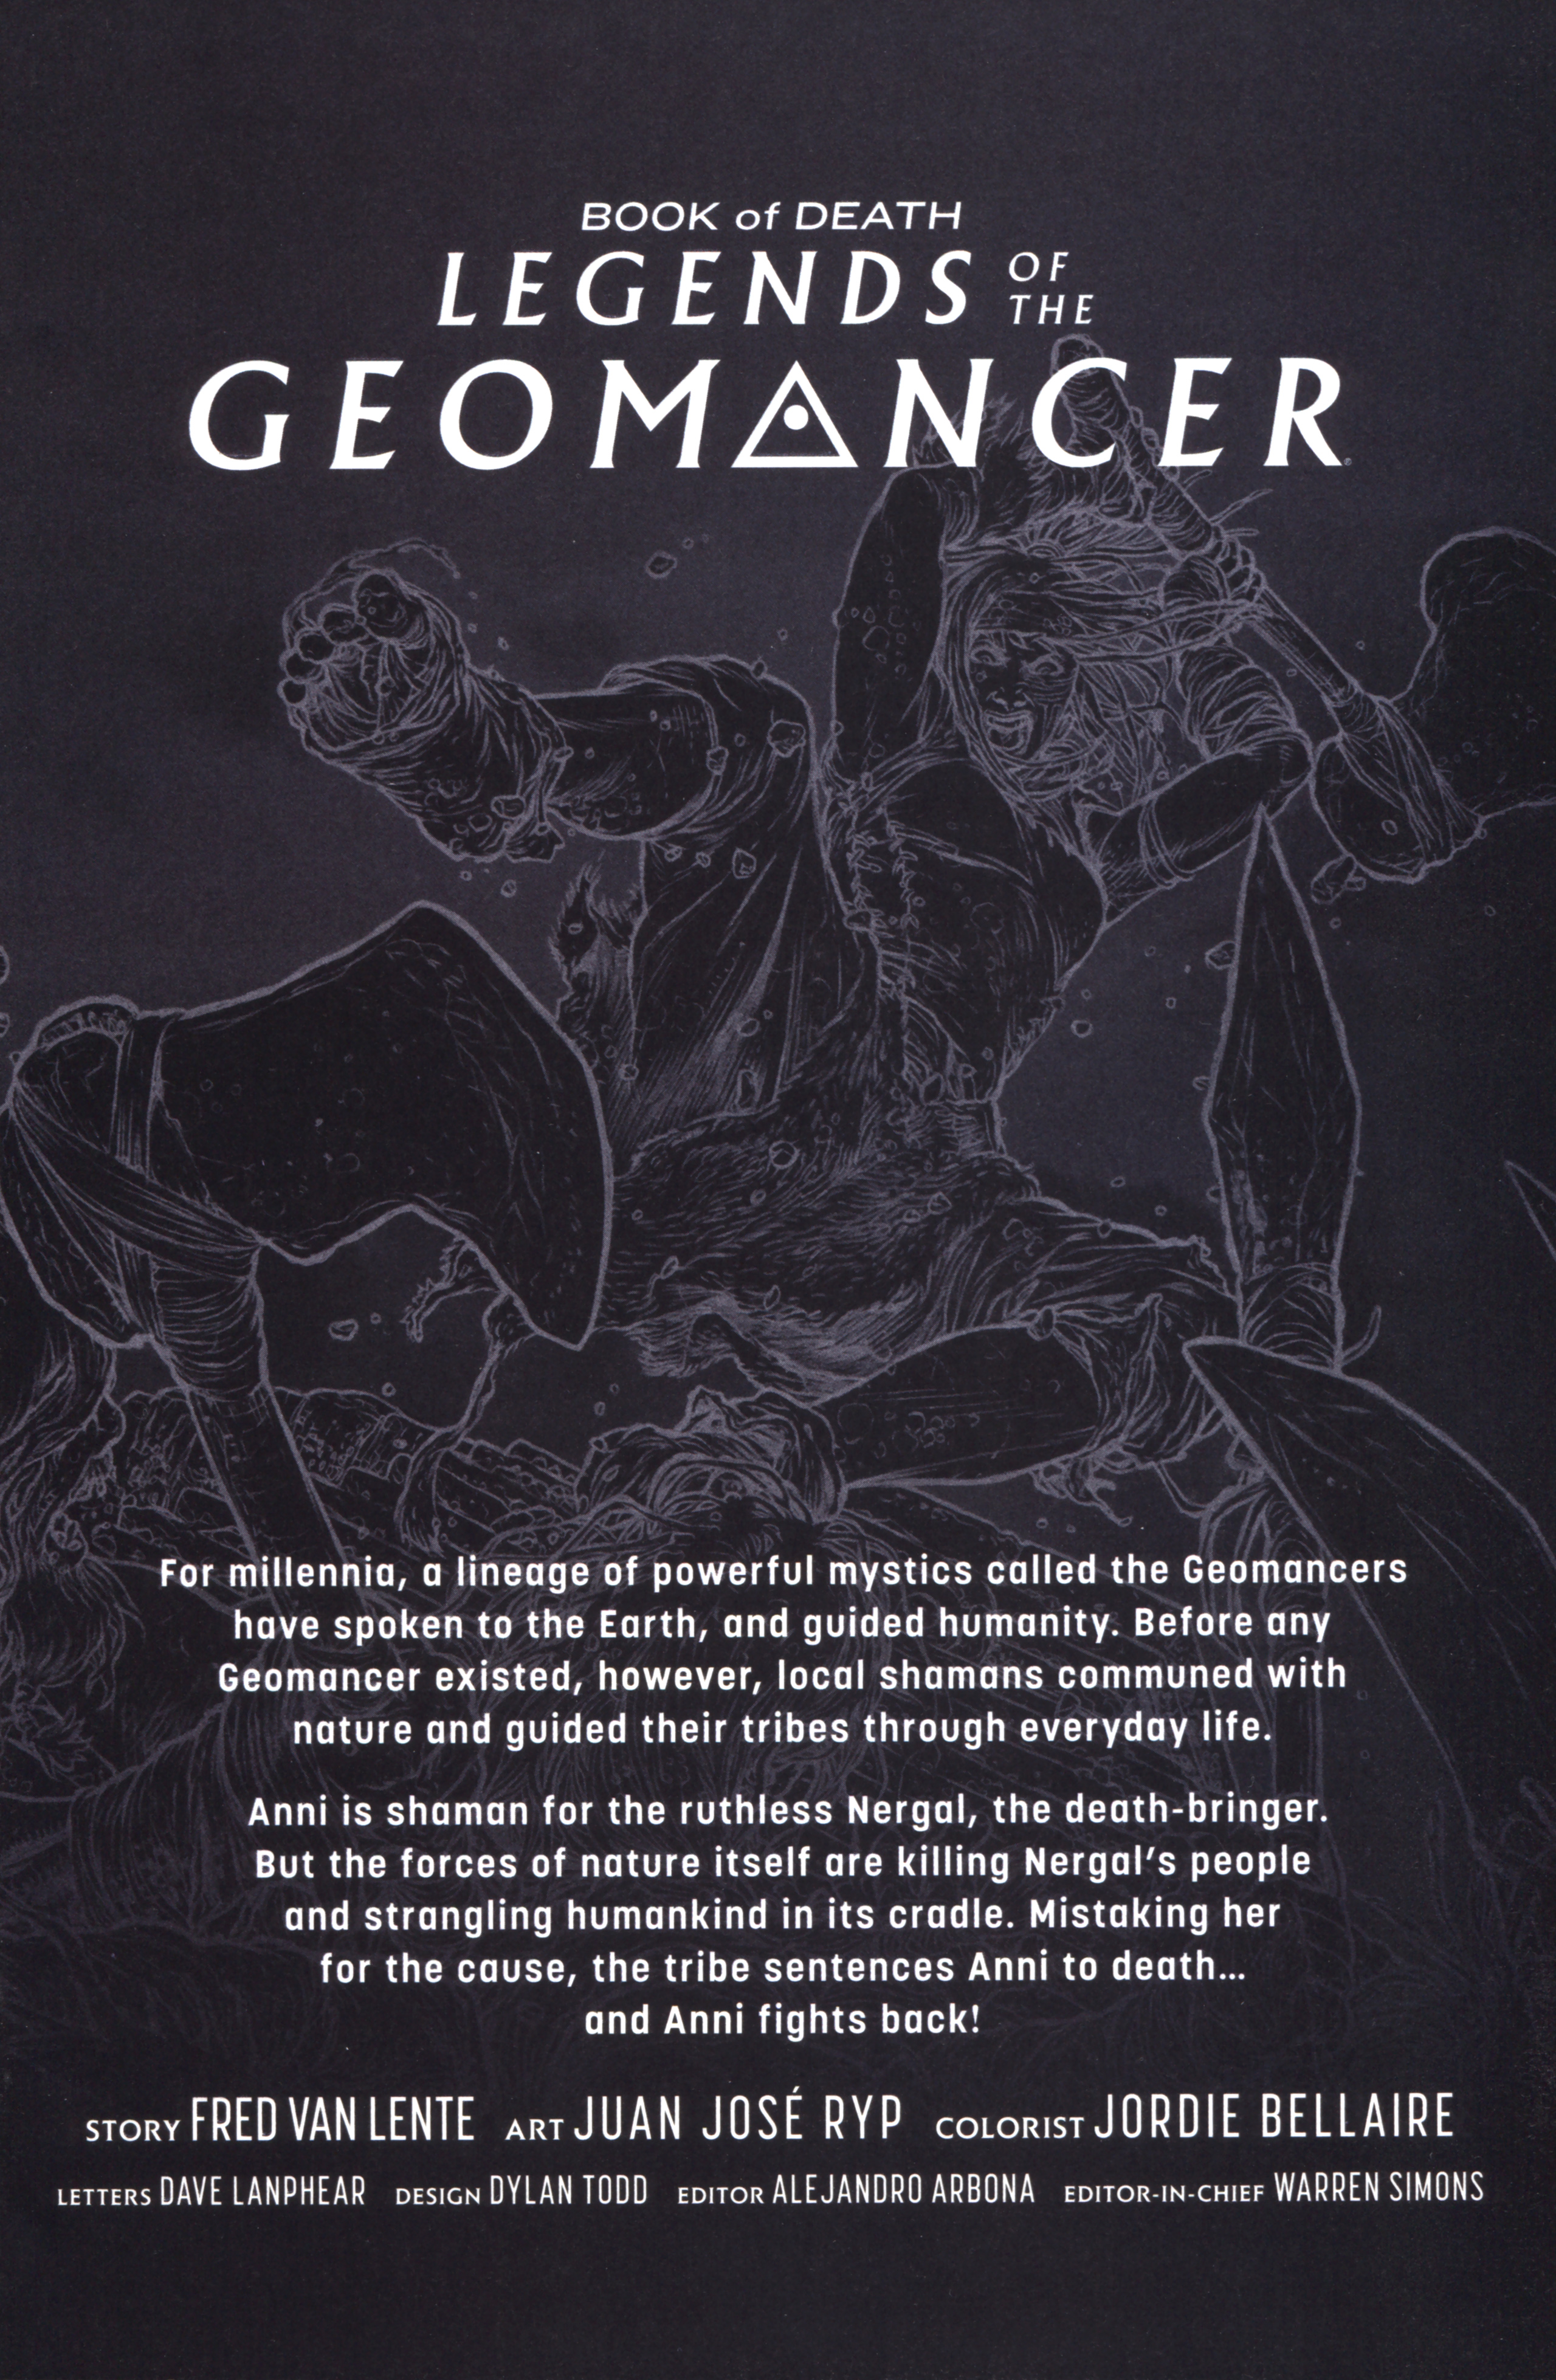 Read online Book of Death: Legends of the Geomancer comic -  Issue #2 - 3